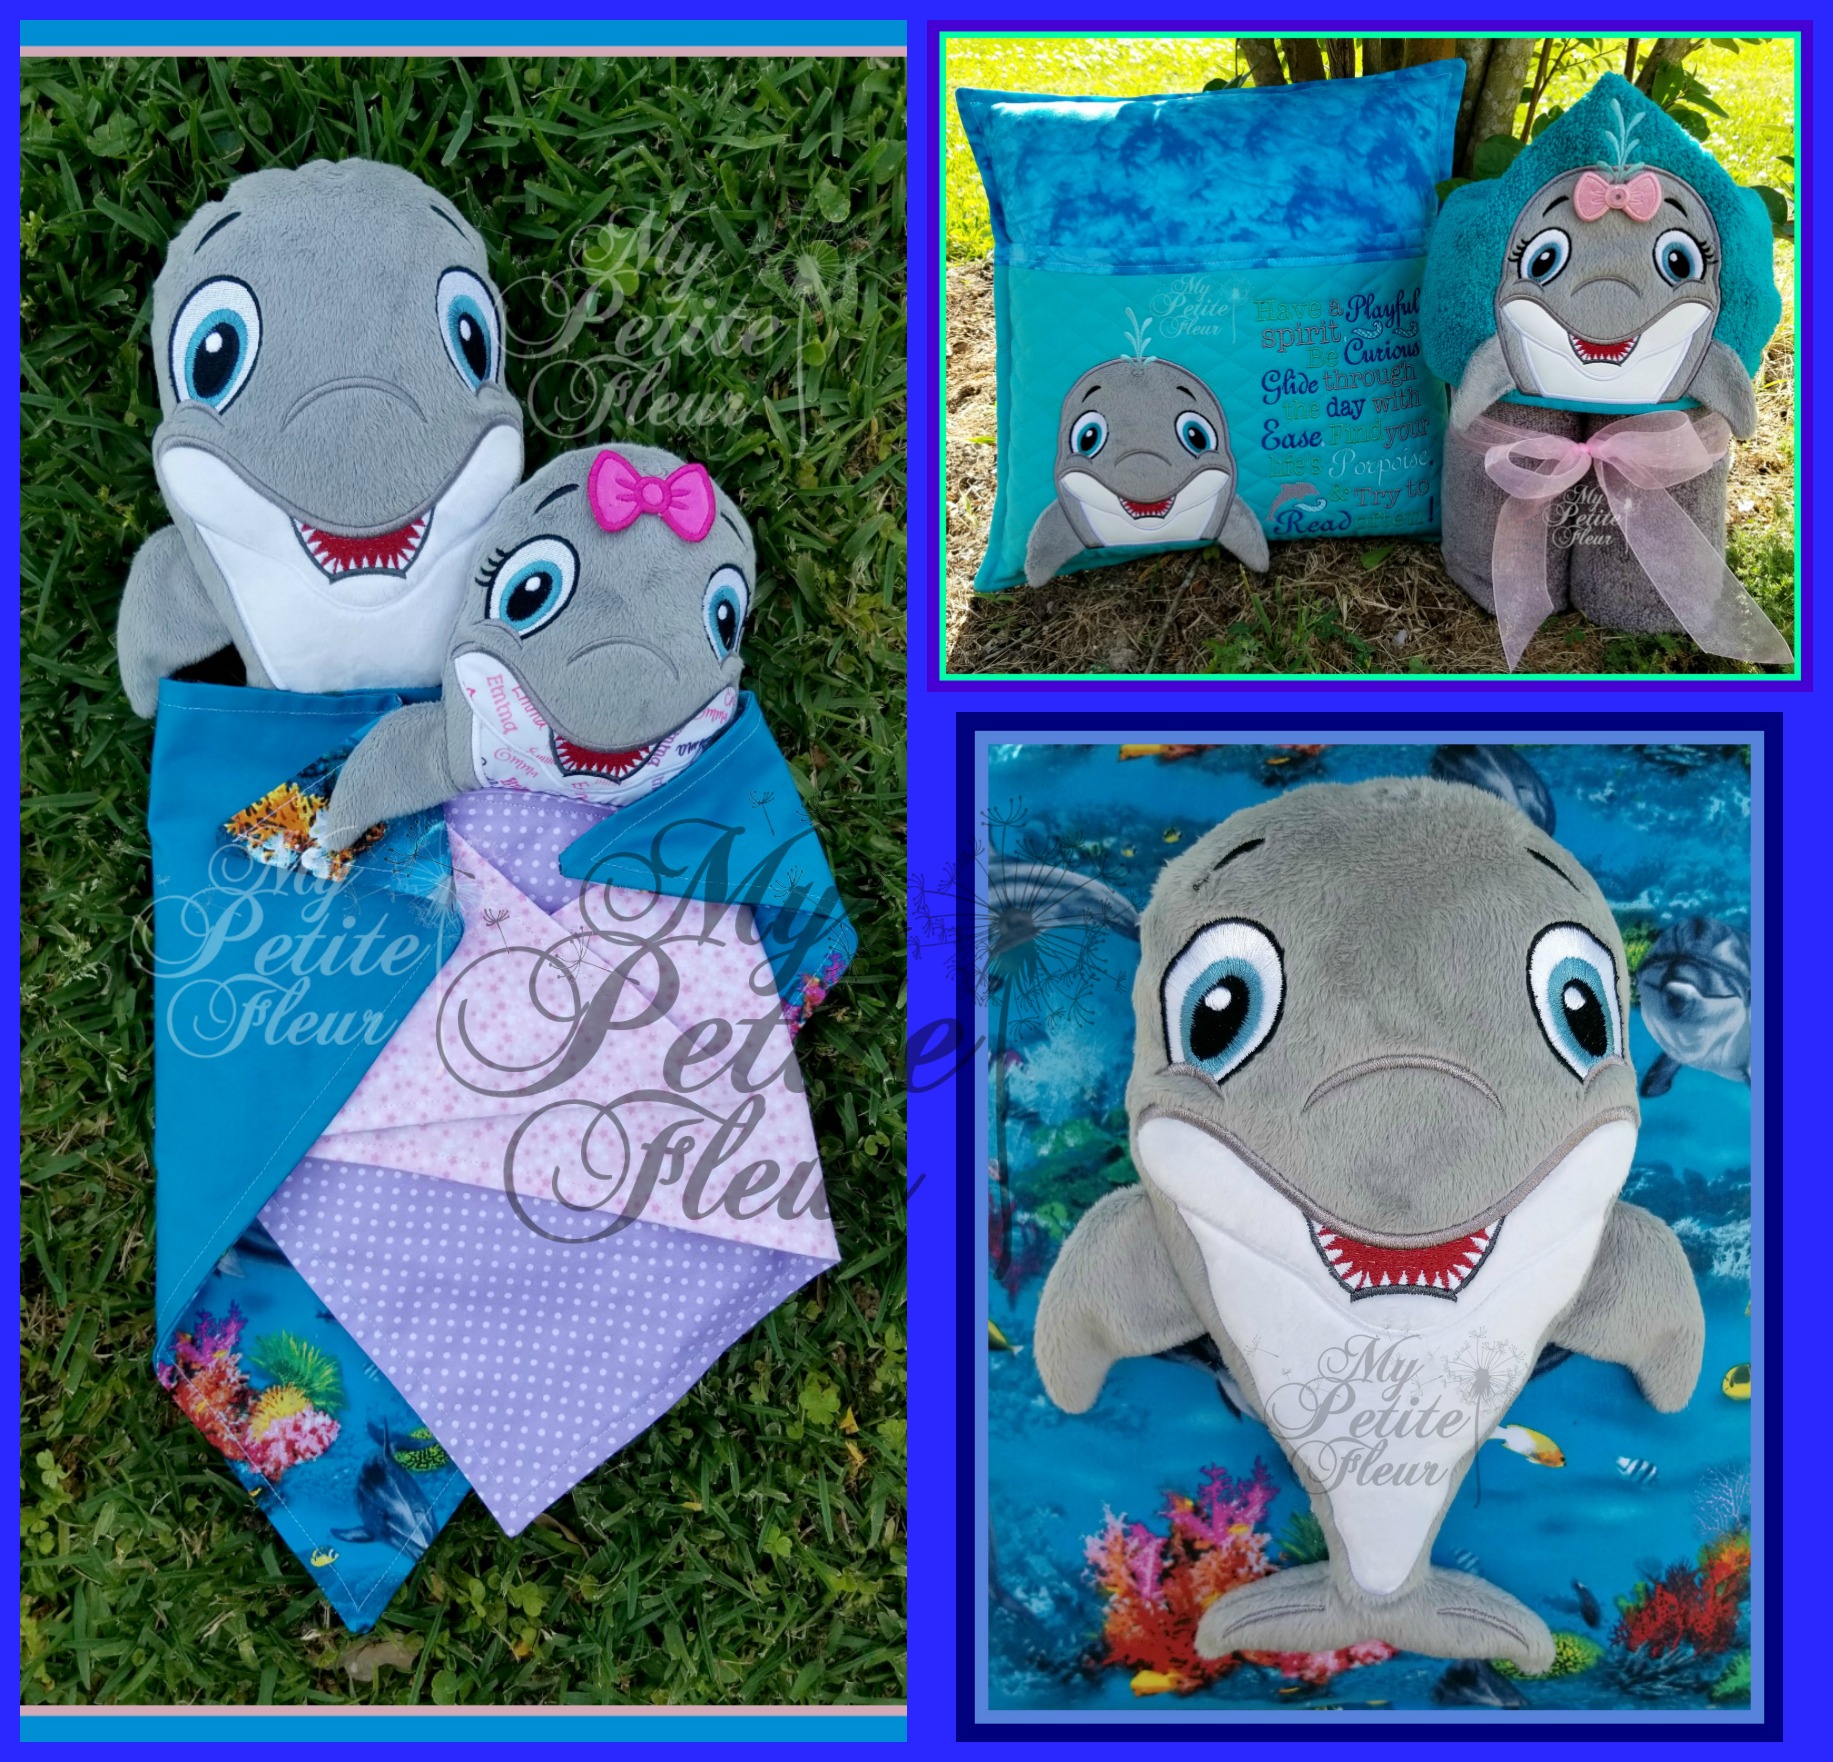 Download Boy Girl Dolphin Everything Pack All Sizes Of Plushies Loveys Peekers Sayings My Petite Fleur Designs